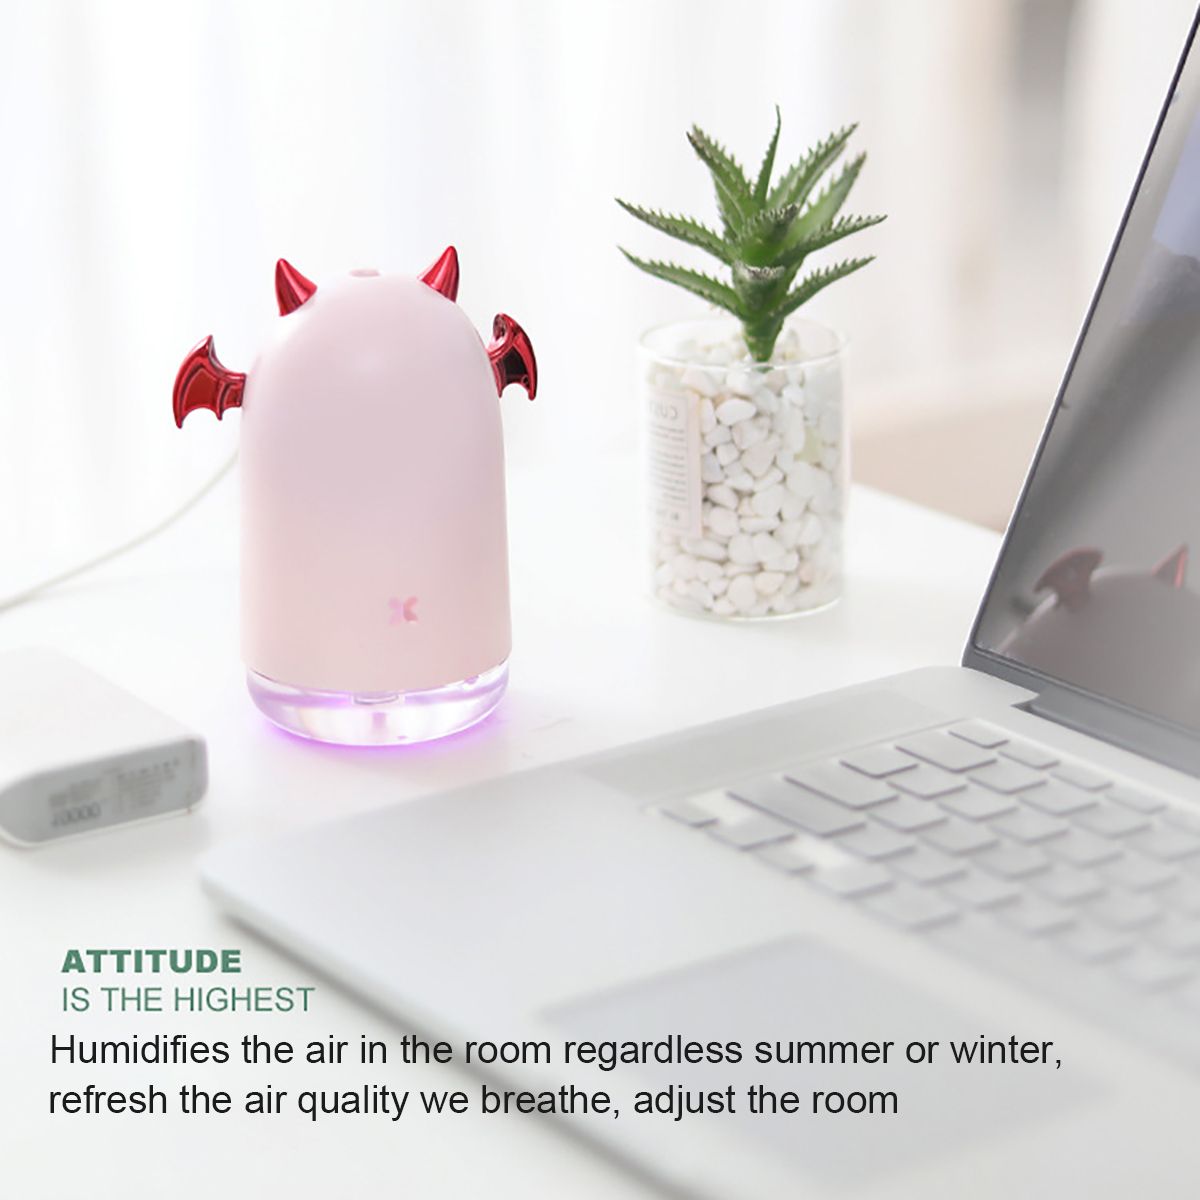 7-LED-Humidifier-USB-Purifier-Mist-Aroma-Essential-Oil-Diffuser-Halloween-Gift-1651094